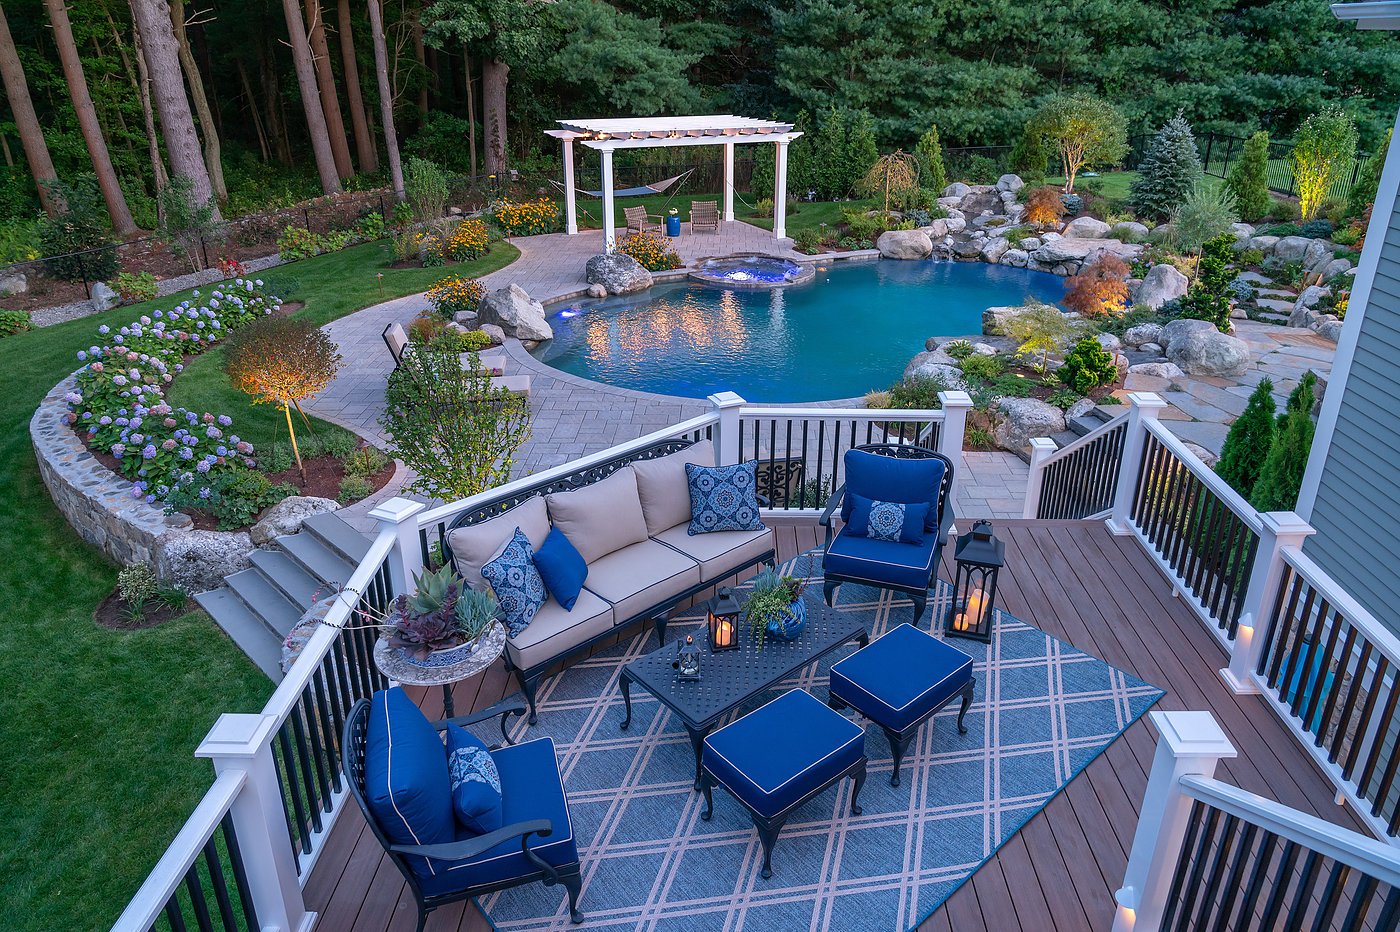 deck lounge area and pool at night in walpole, massachusetts